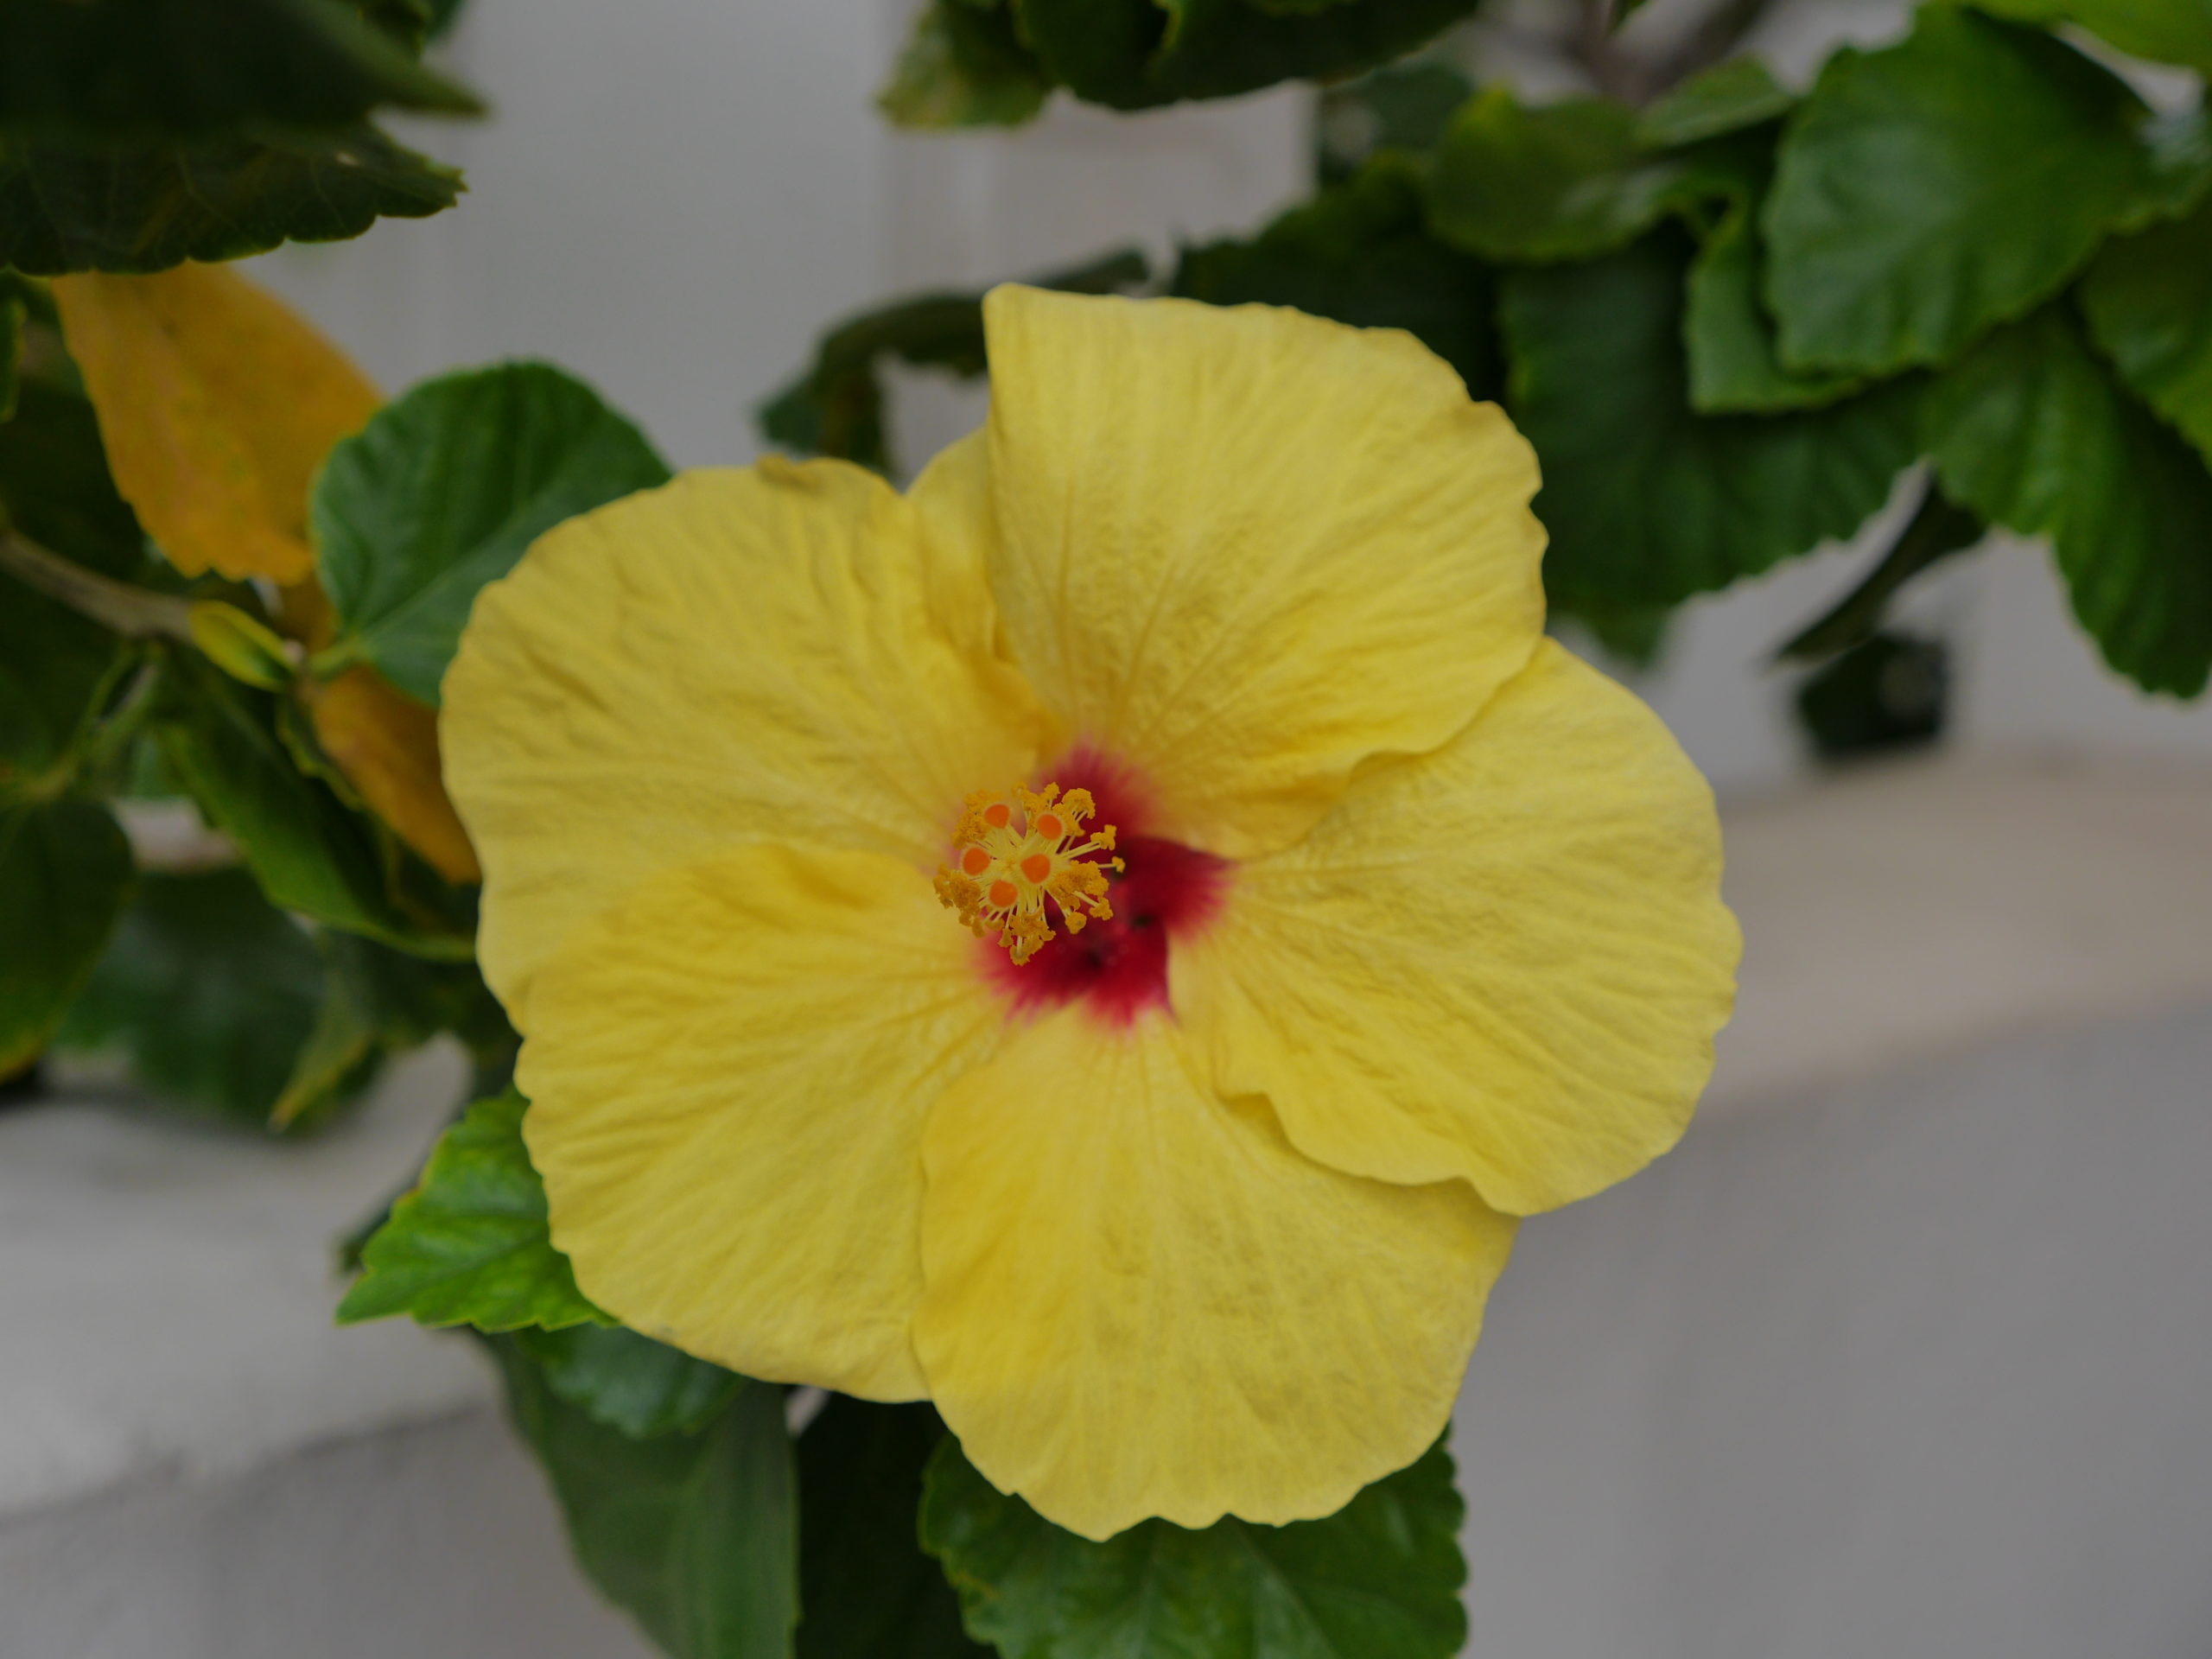 Tropical Hibiscus are hard to pass up when in flower. However, the need plenty of light and warm temperatures and can have a number of insect issues. These, too, can be fast growers, but unlike the Schefflera, the Hibiscus can easily be pruned and managed.